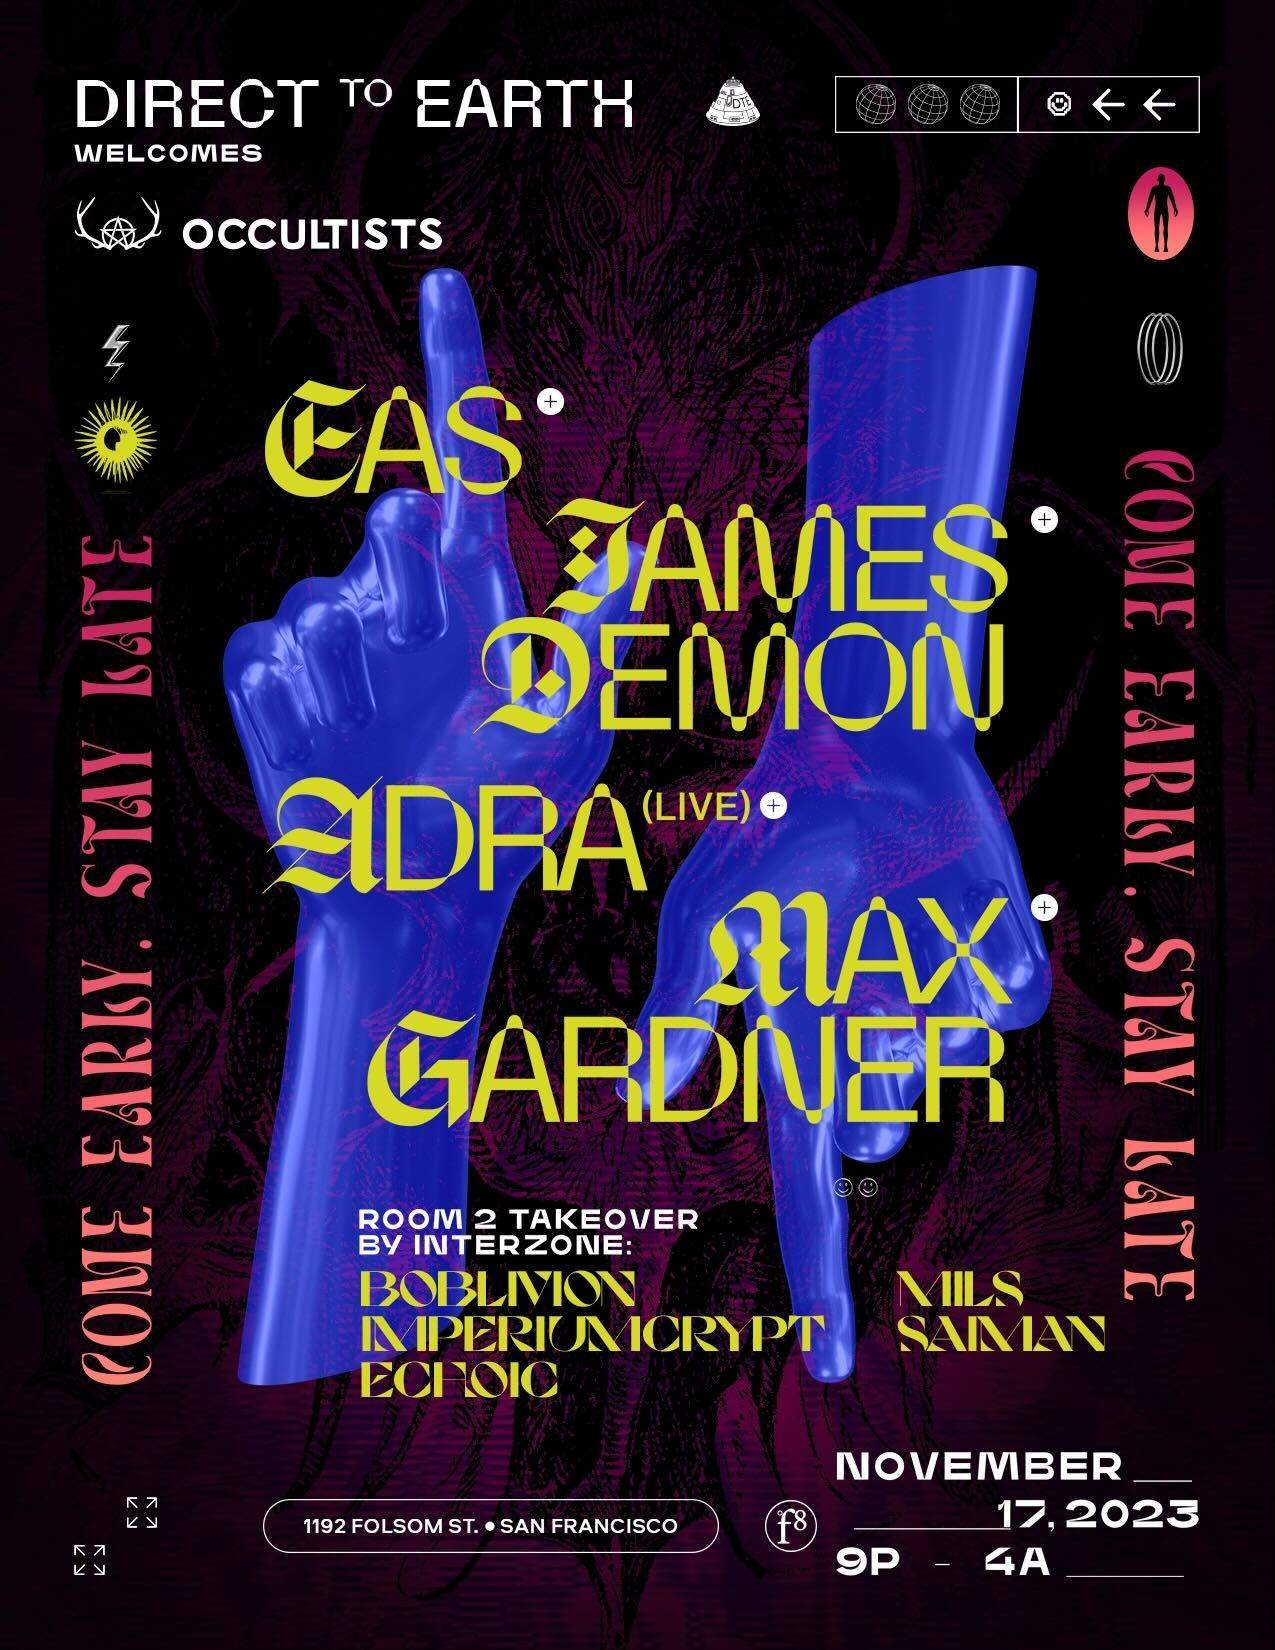 Direct to Earth welcome Occultists with EAS, James Demon, Interzone, Adra (live) & Max Gardner - フライヤー表